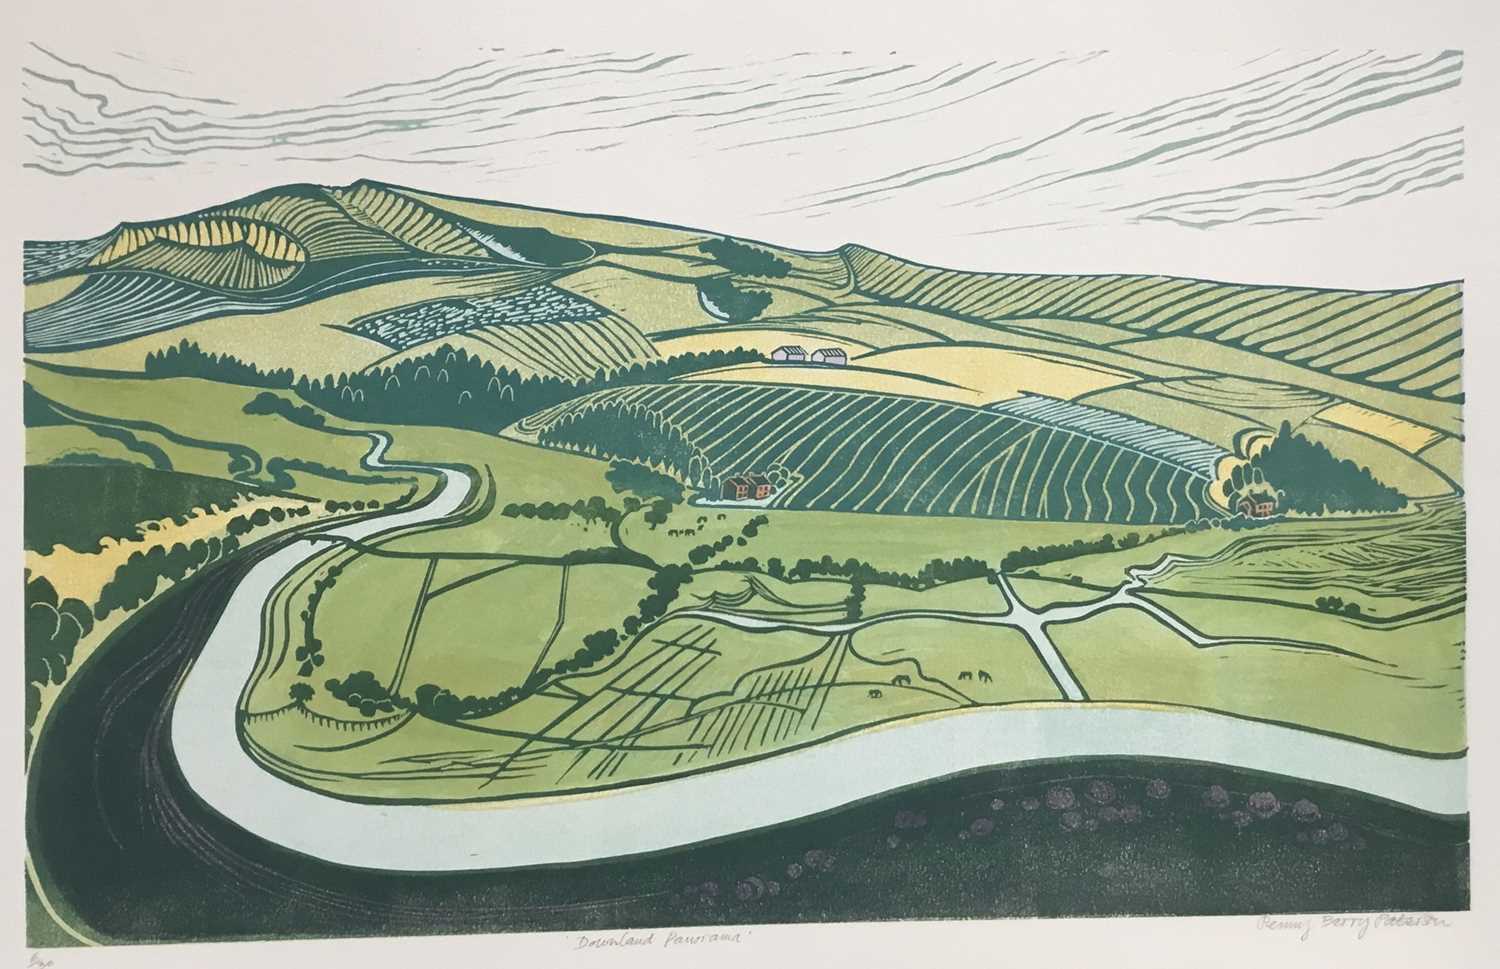 Lot 162 - Penny Berry Paterson (1941-2021), colour linocut print, Downland landscape, signed and numbered 6/30, image 31 x 52cm